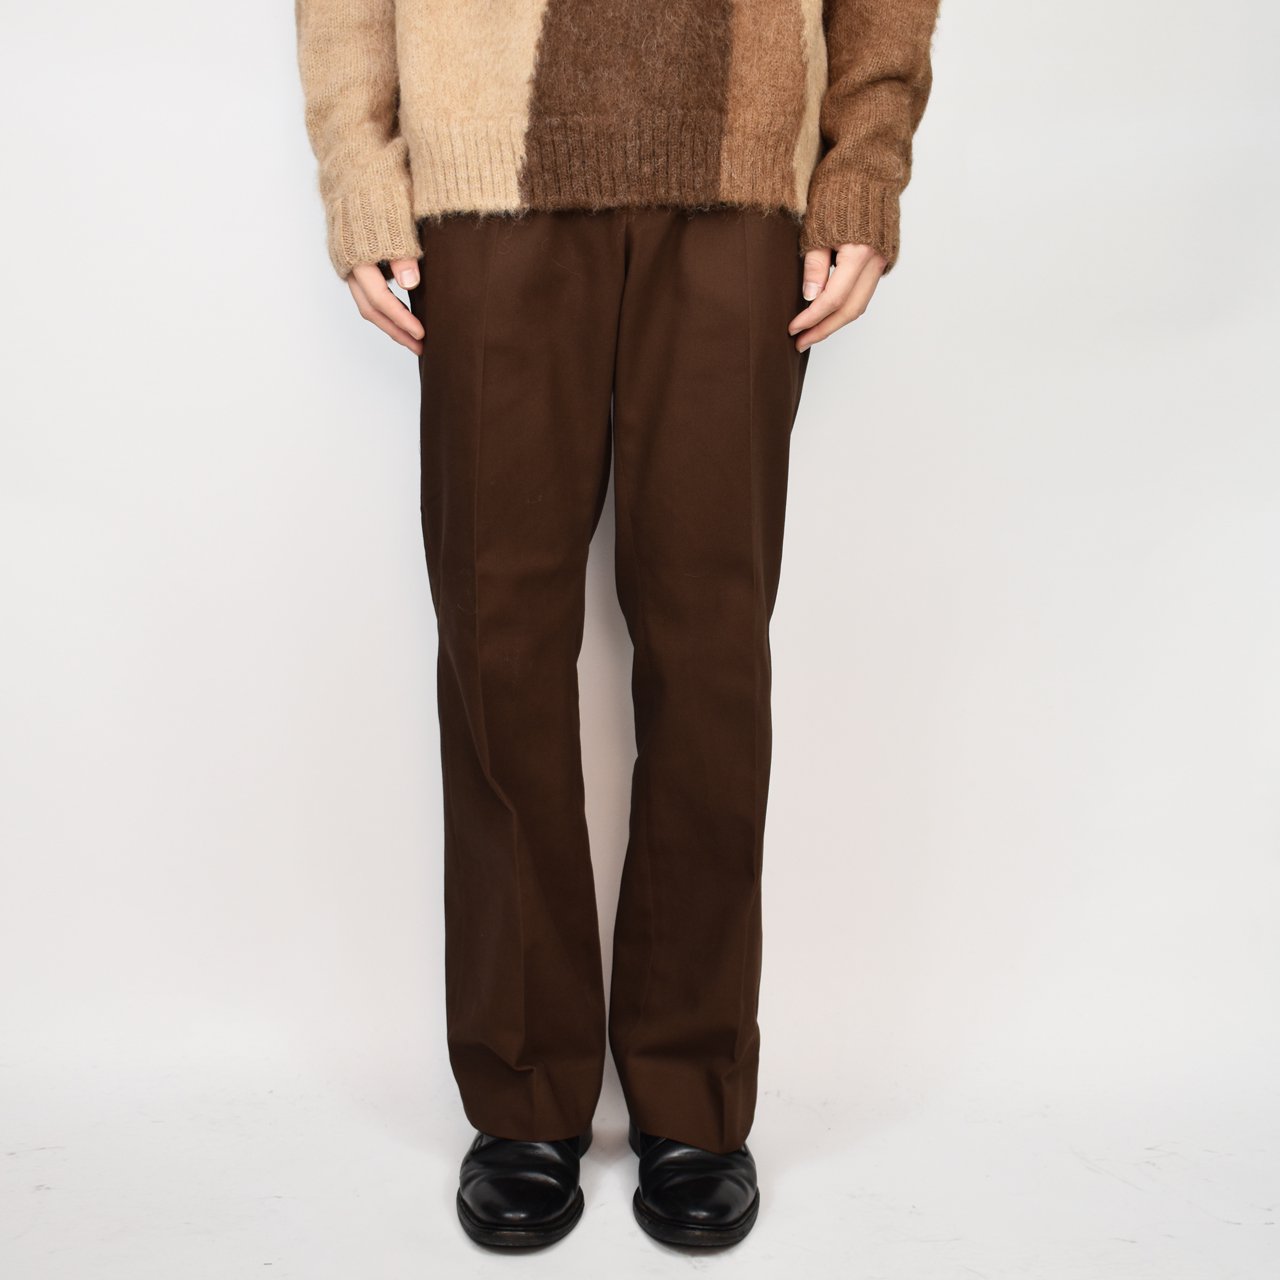 <img class='new_mark_img1' src='https://img.shop-pro.jp/img/new/icons5.gif' style='border:none;display:inline;margin:0px;padding:0px;width:auto;' />MARKAWARE (ޡ)FLAT FRONT FLARED TROUSERS BROWN -ORGANIC COTTON SURVIVAL CLOTH-